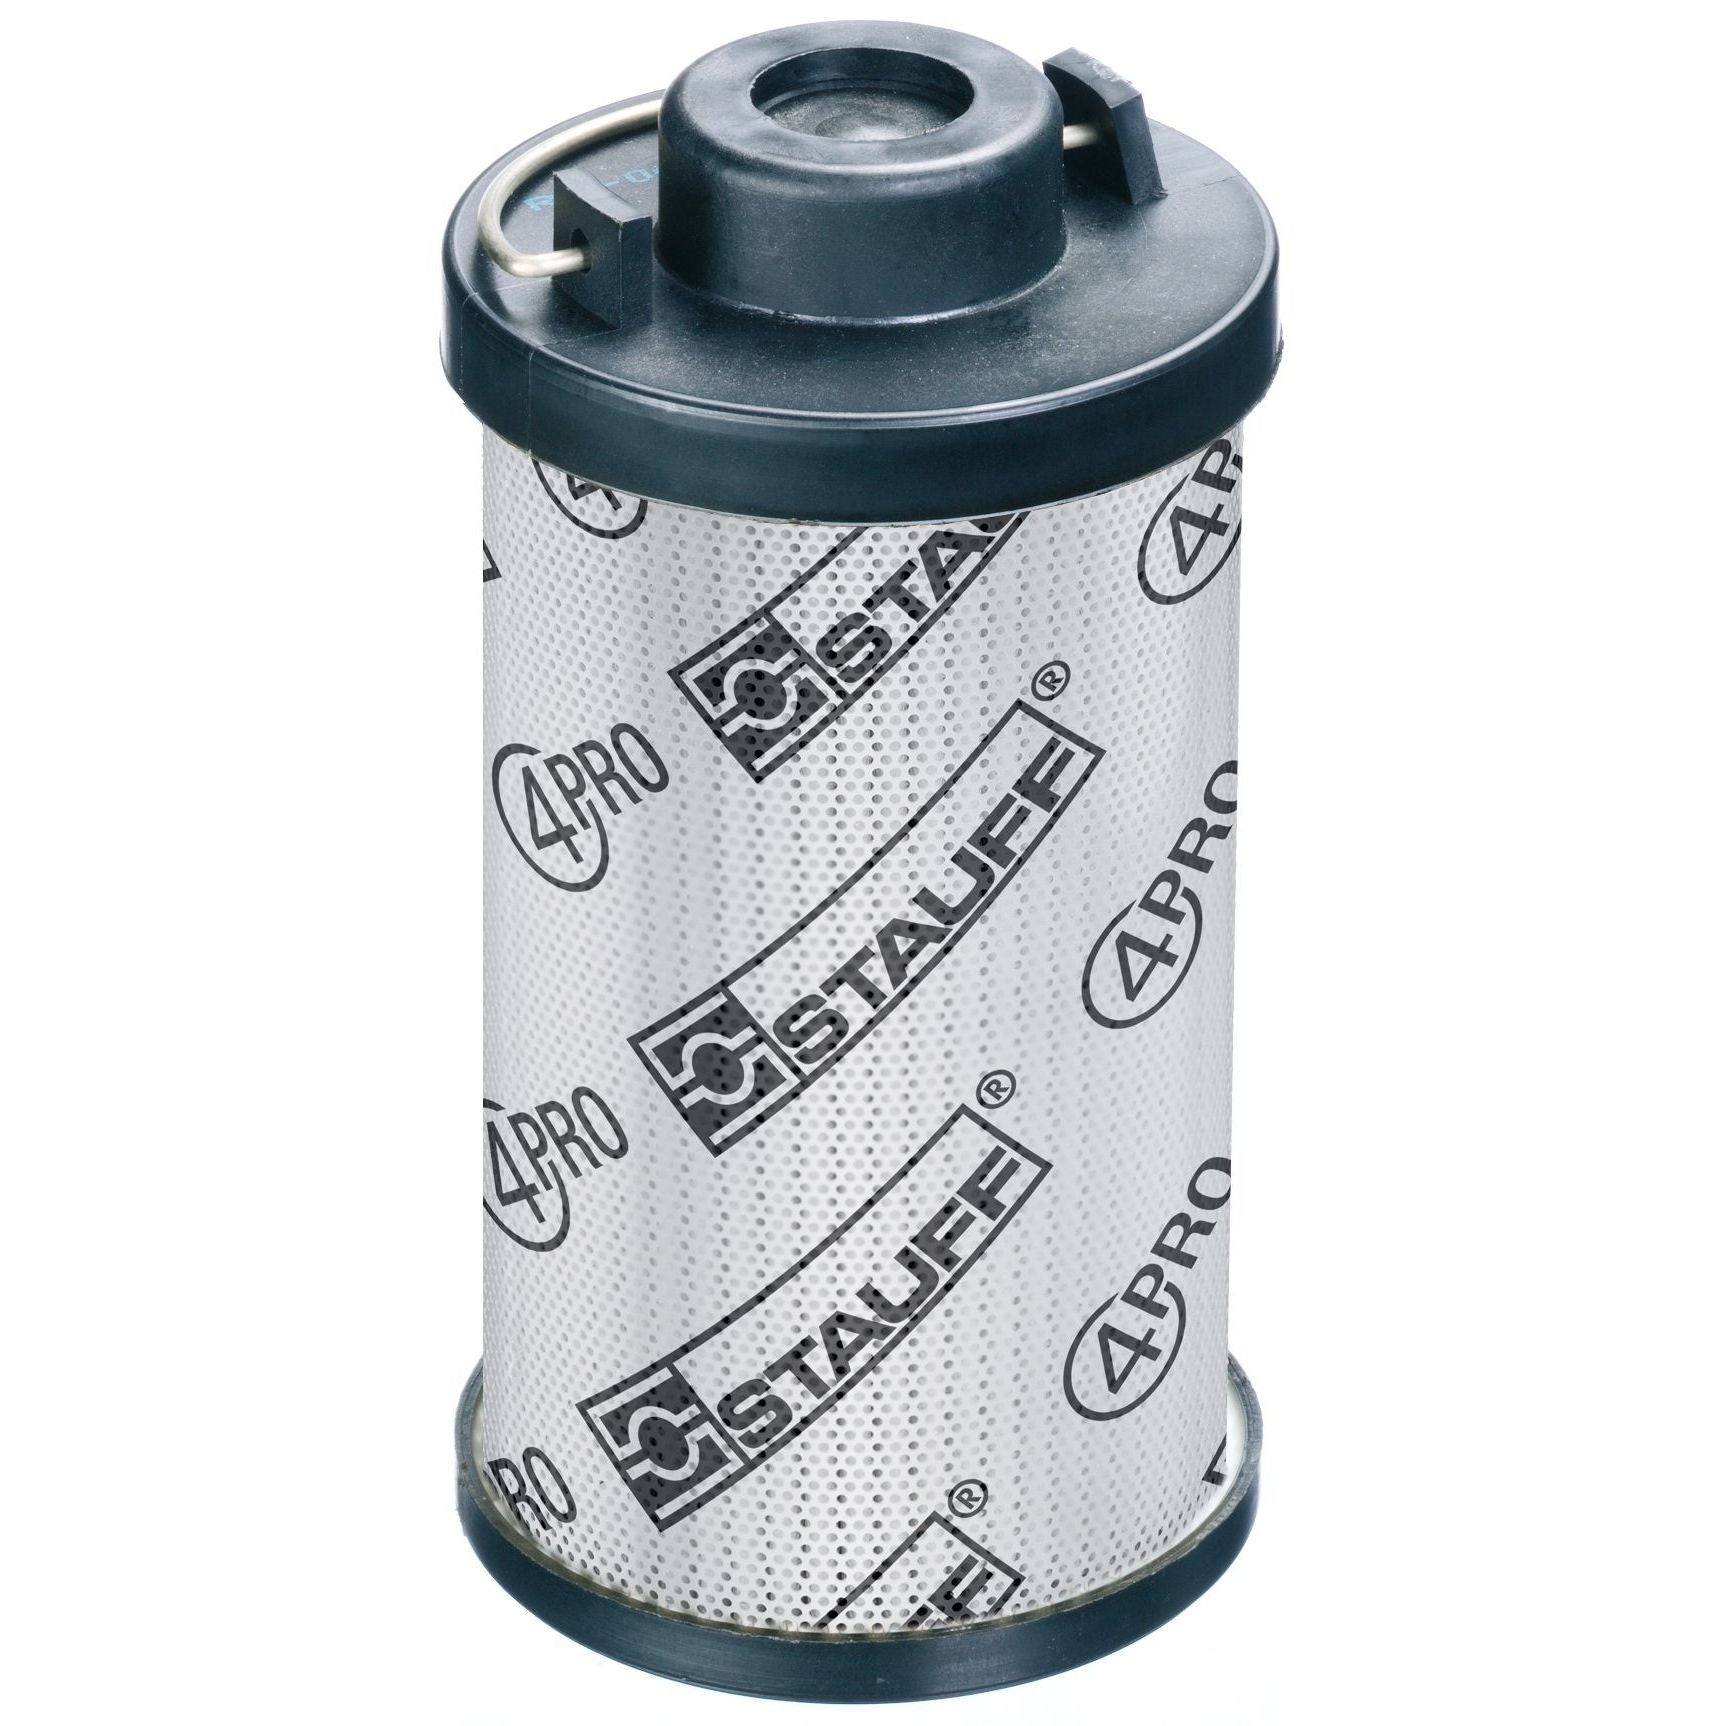 RE-014-G-20-B-B3/4 : Stauff RF-014 Series Filter Element, 20 Micron, Synthetic, 363psi Collapse Differential, Buna